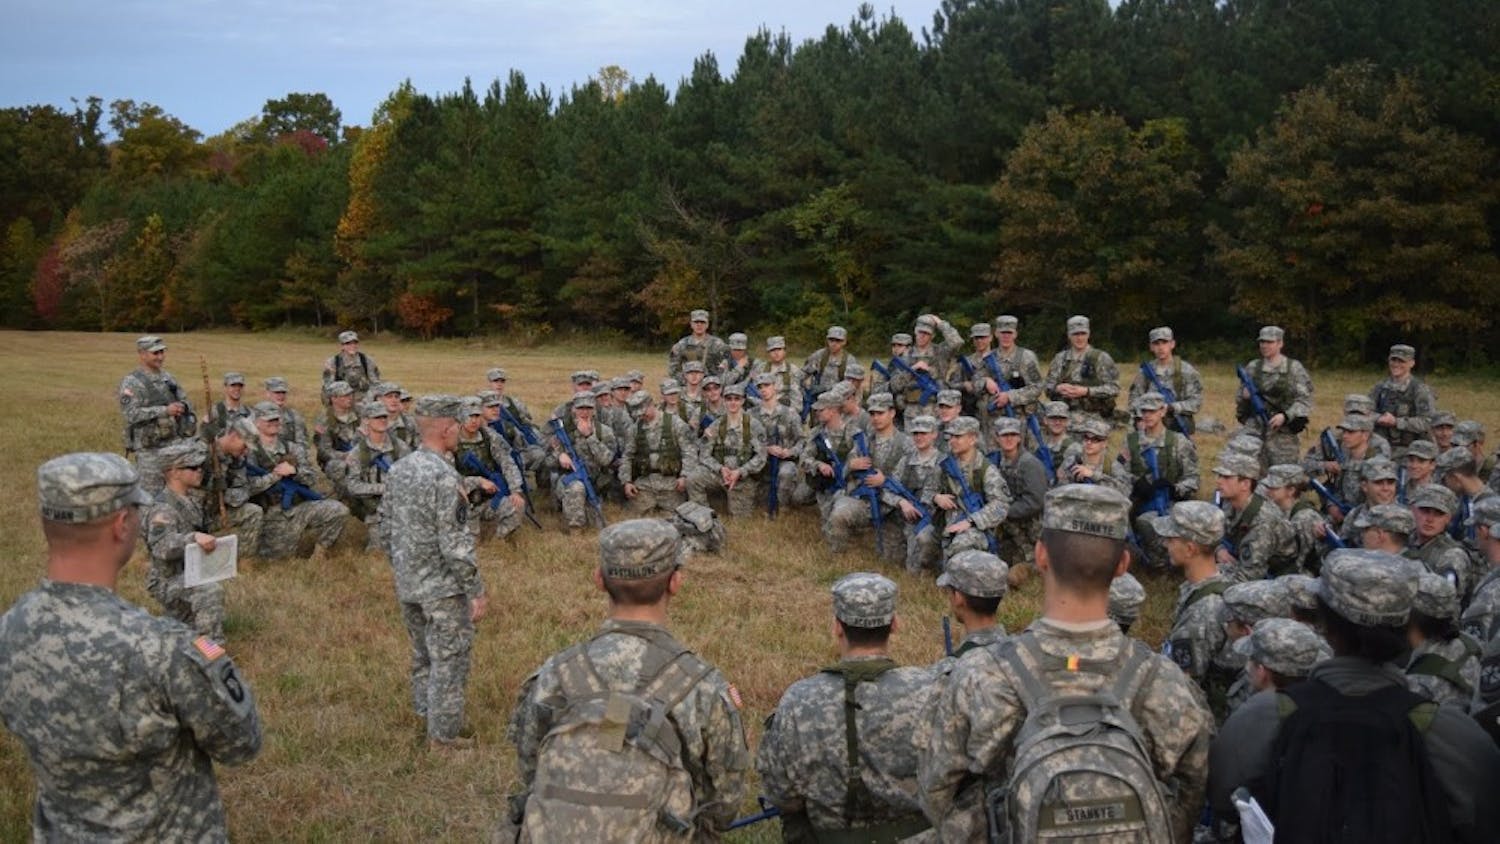 Lieutenant Colonel Donahue Speaking with the entire Battalion at Quantico.